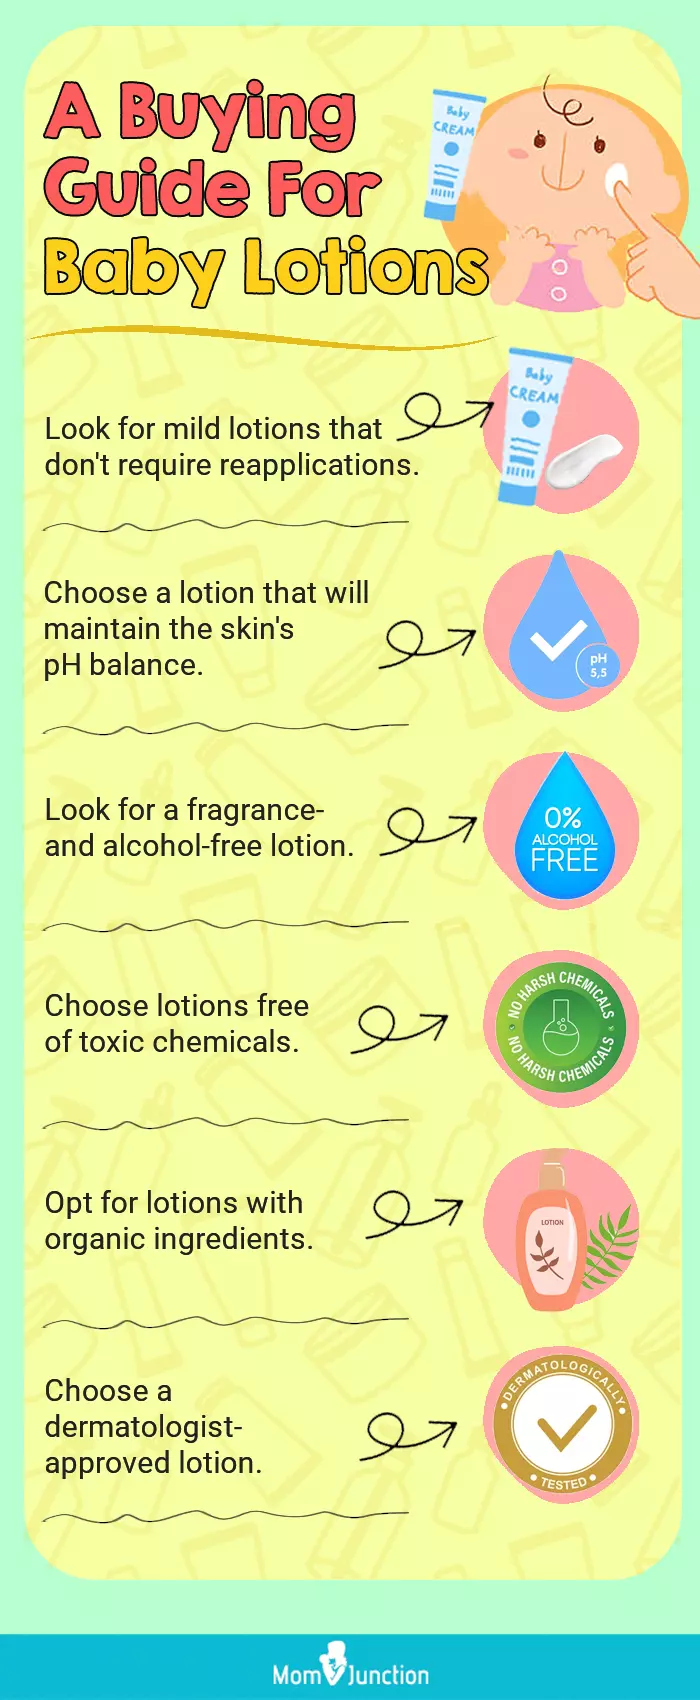 A Buying Guide For Baby Lotions